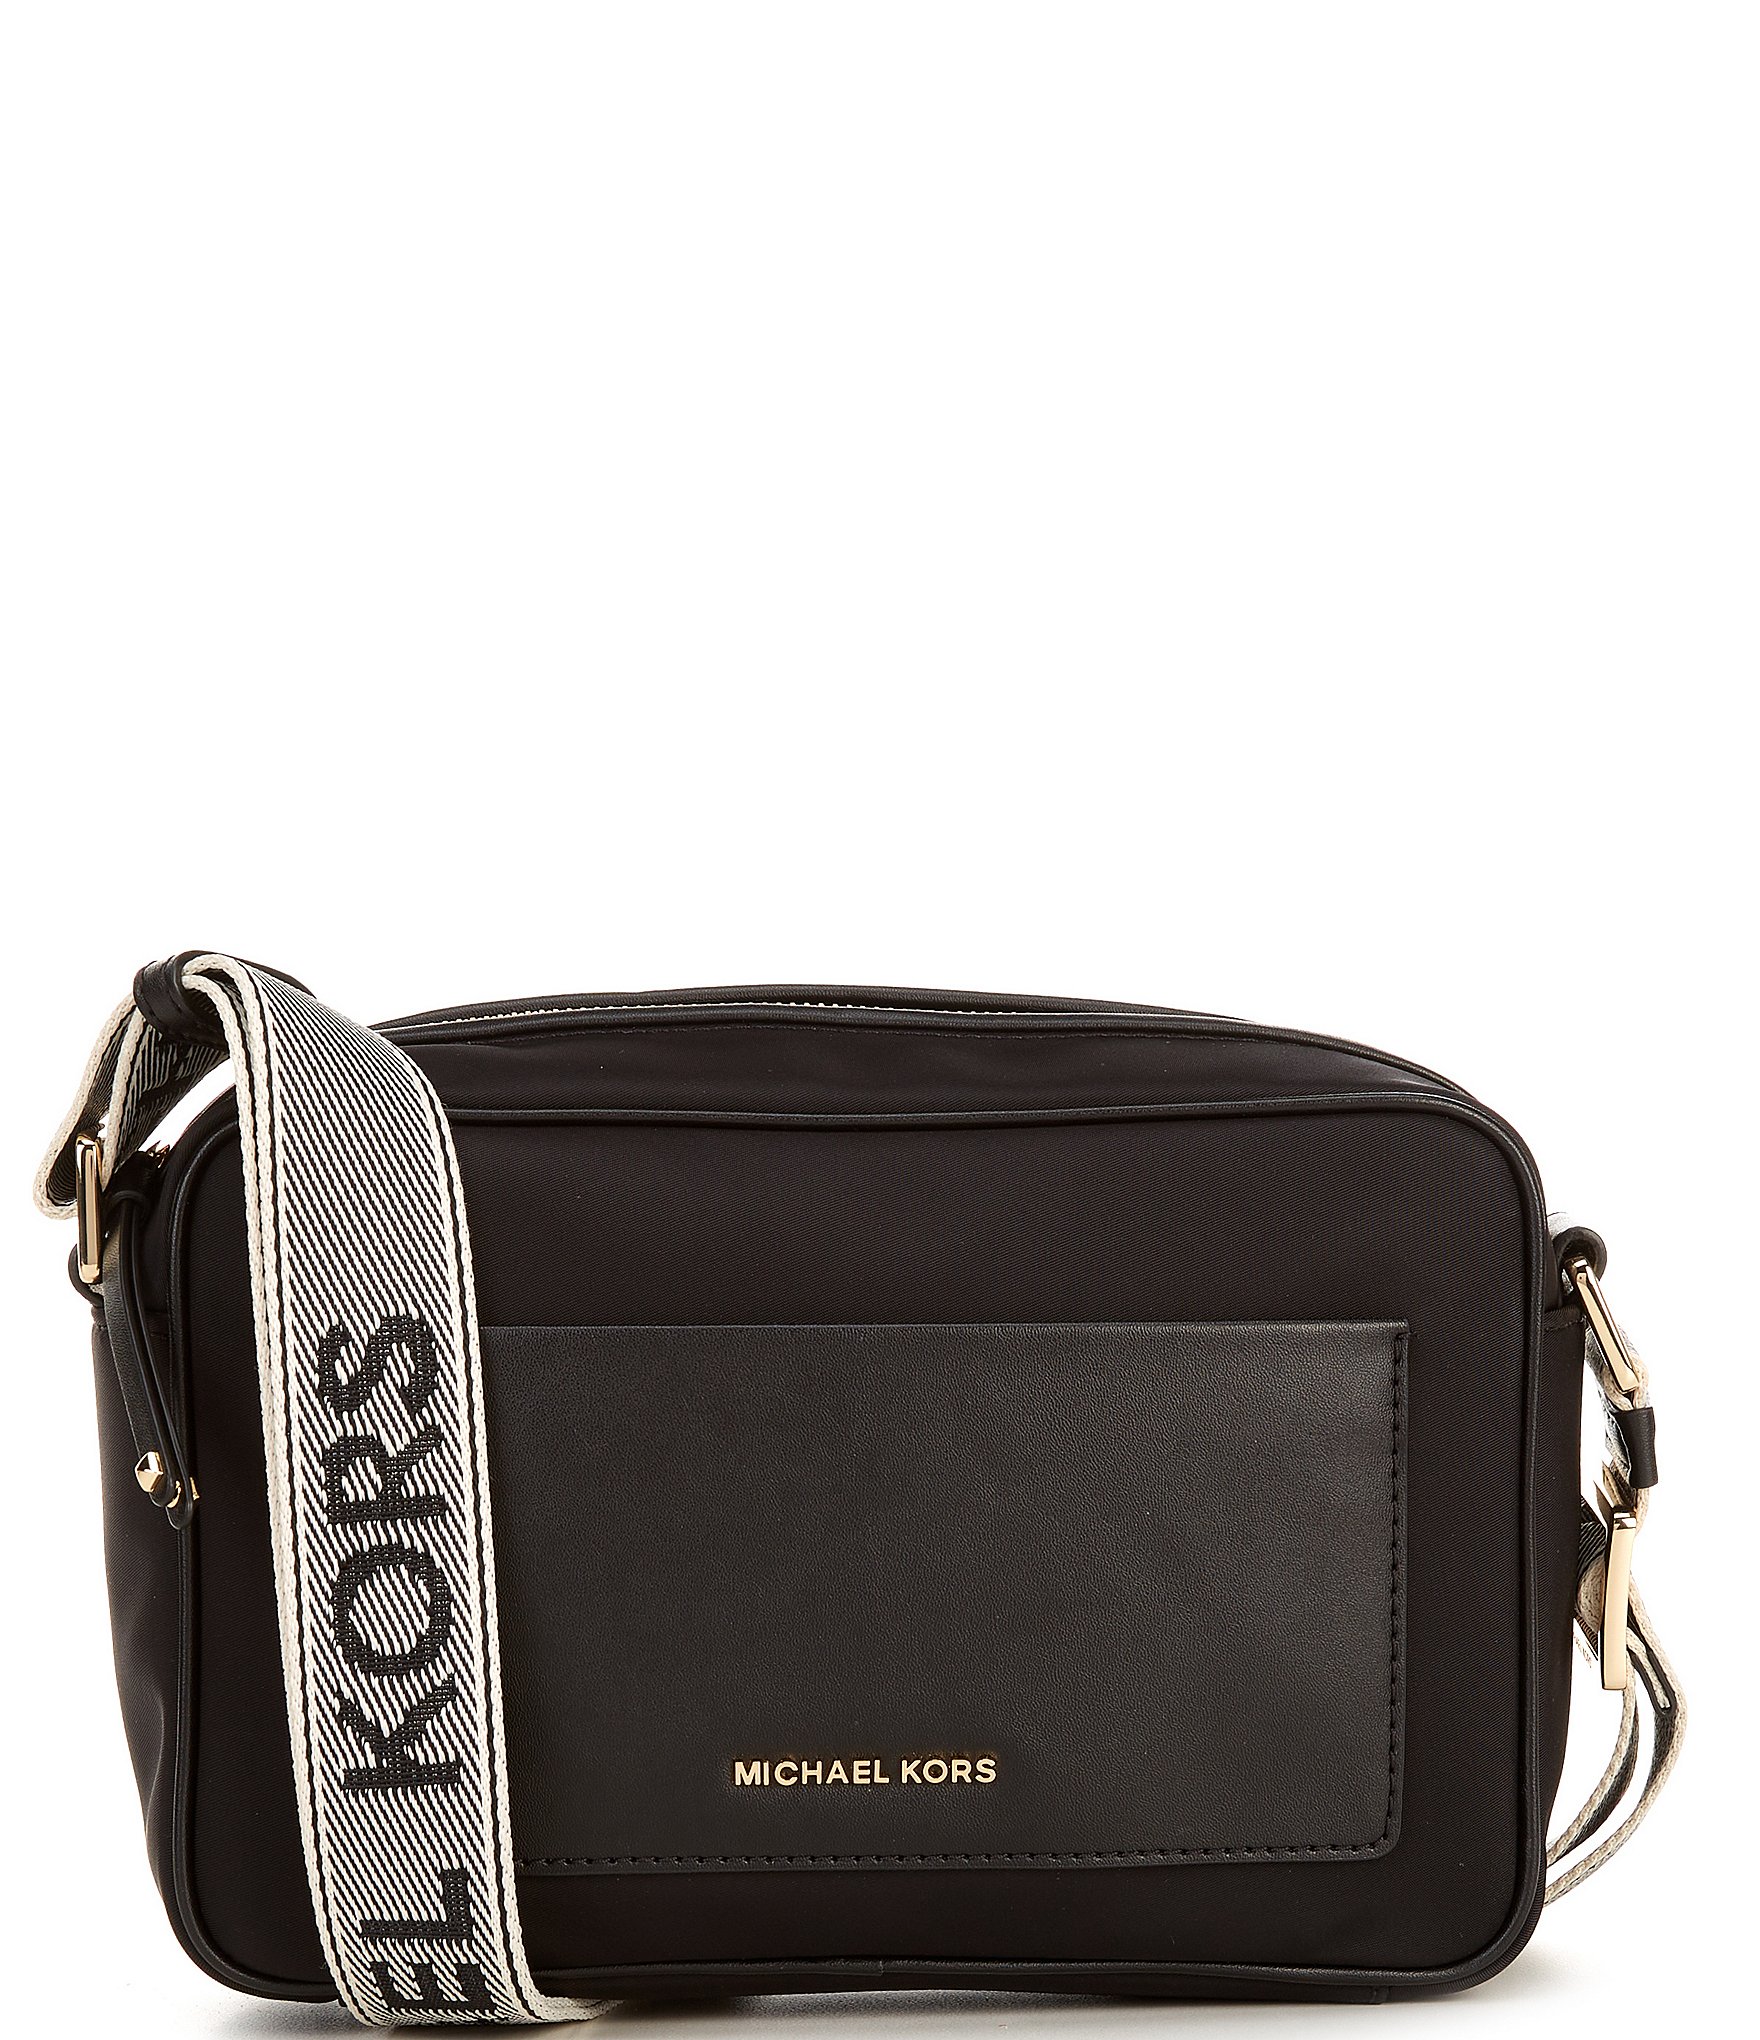 Own the Clear Bag Trend With This 40%-Off Michael Kors Crossbody | Us Weekly